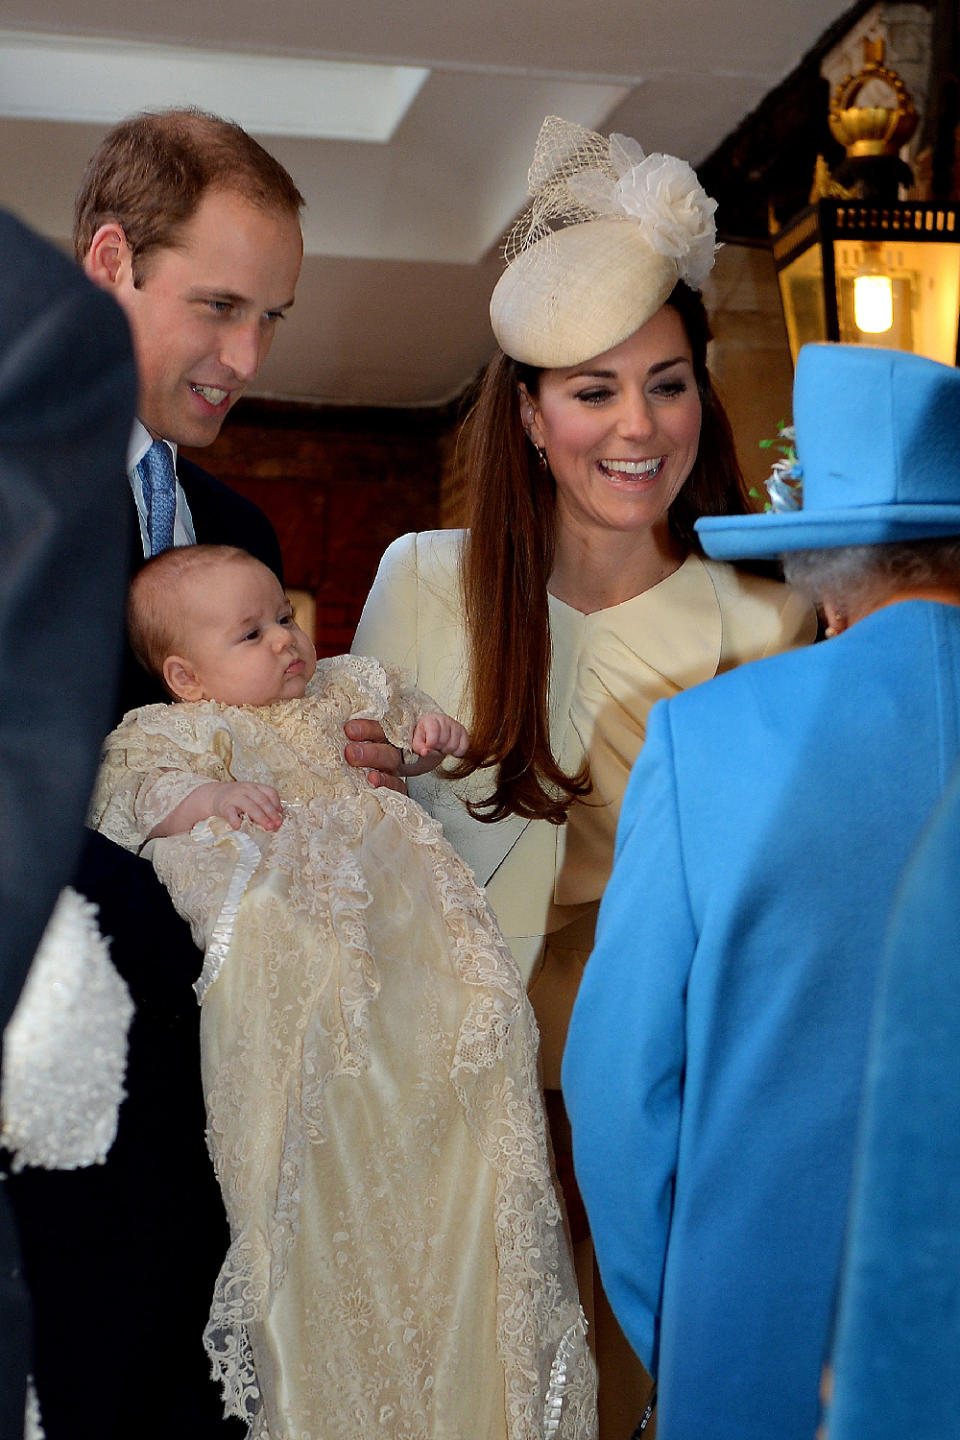 Each royal baby wears the same christening shawl